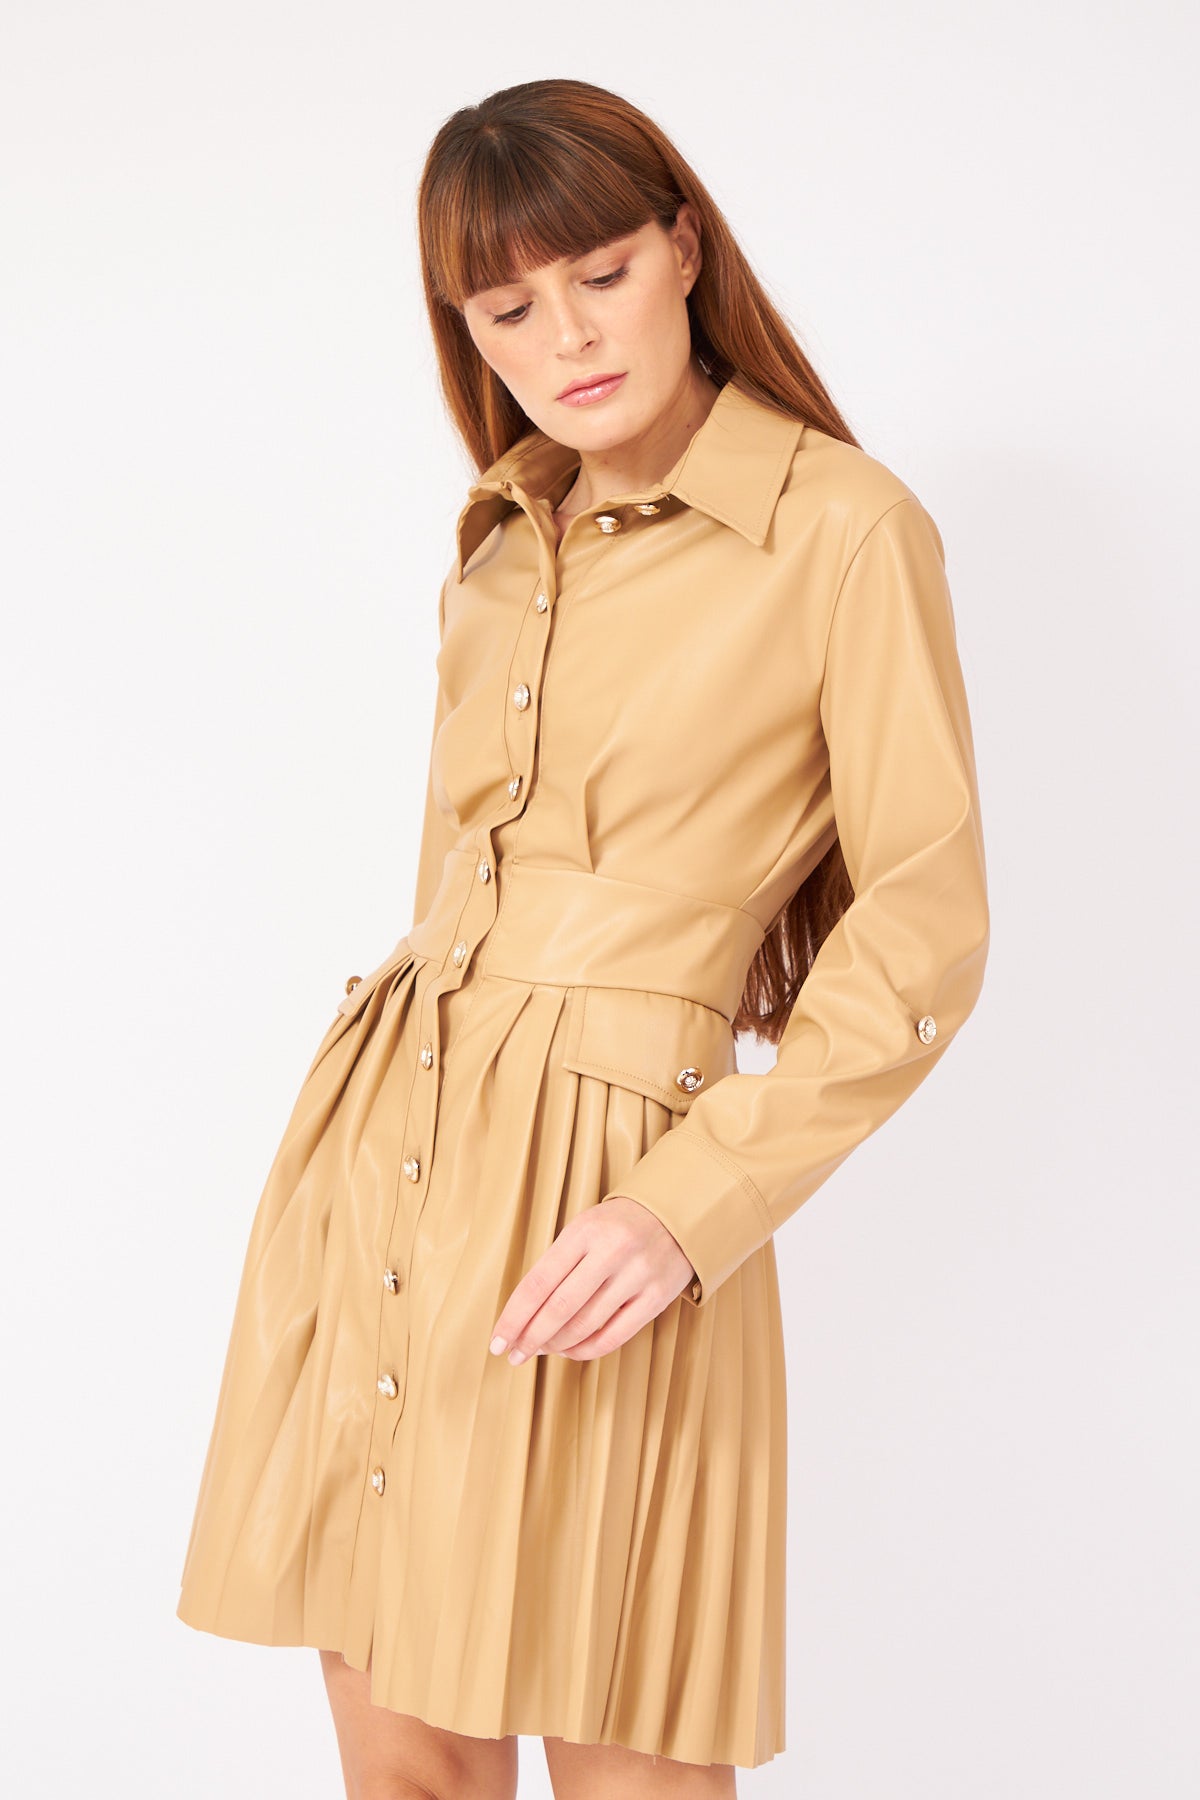 Beige Leather Pleated Short Shirt Dress With Pockets - Lebbse